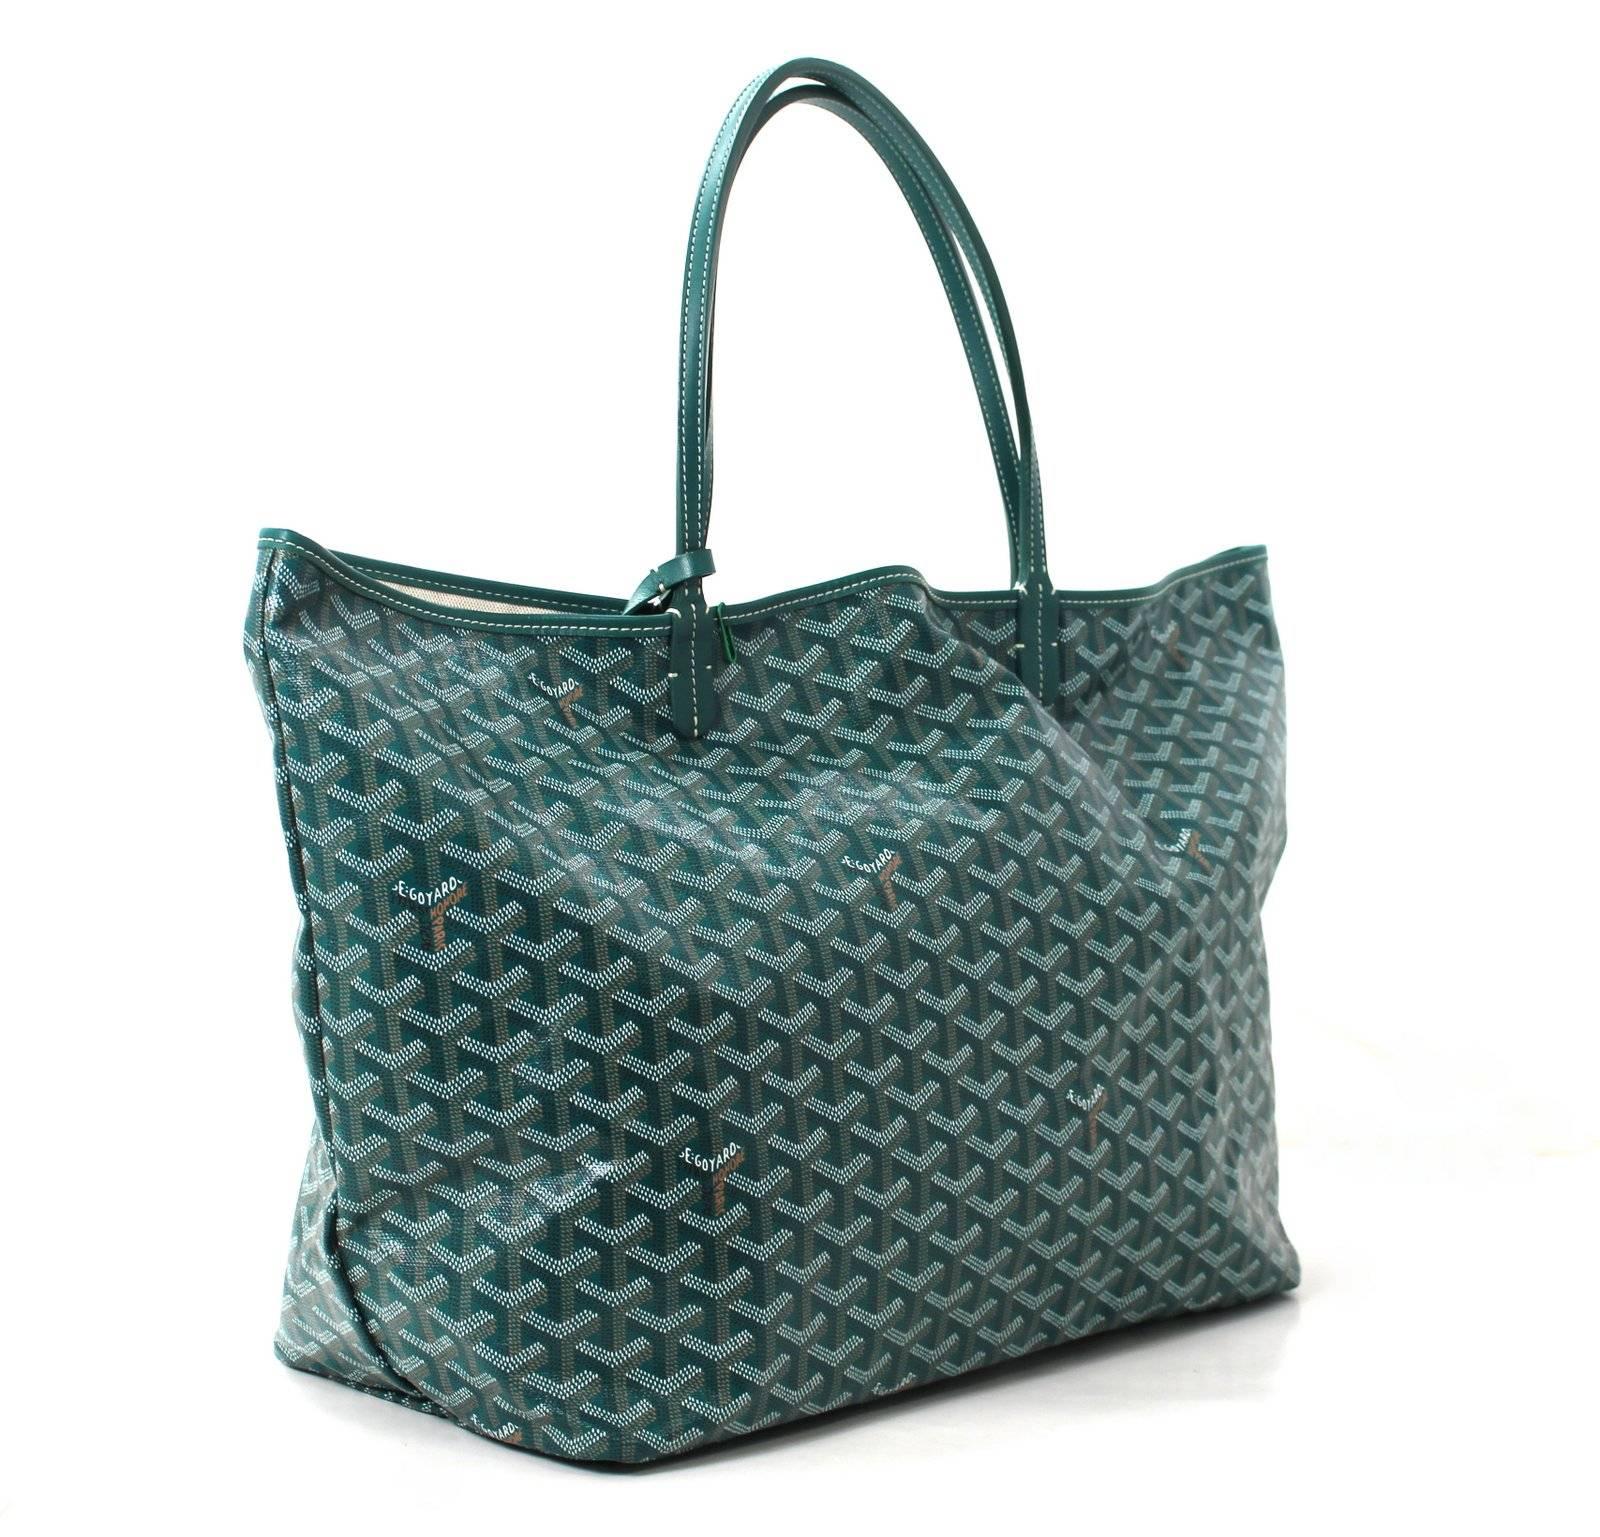 Goyard Green St. Louis GM Tote – NEW, tag attached
Extremely  exclusive, Goyard is only available at Barney's NY, Bergdorf Goodman and the Goyard boutique in San Francisco in the U.S. The St. Louis totes are generally sold out everywhere.  
